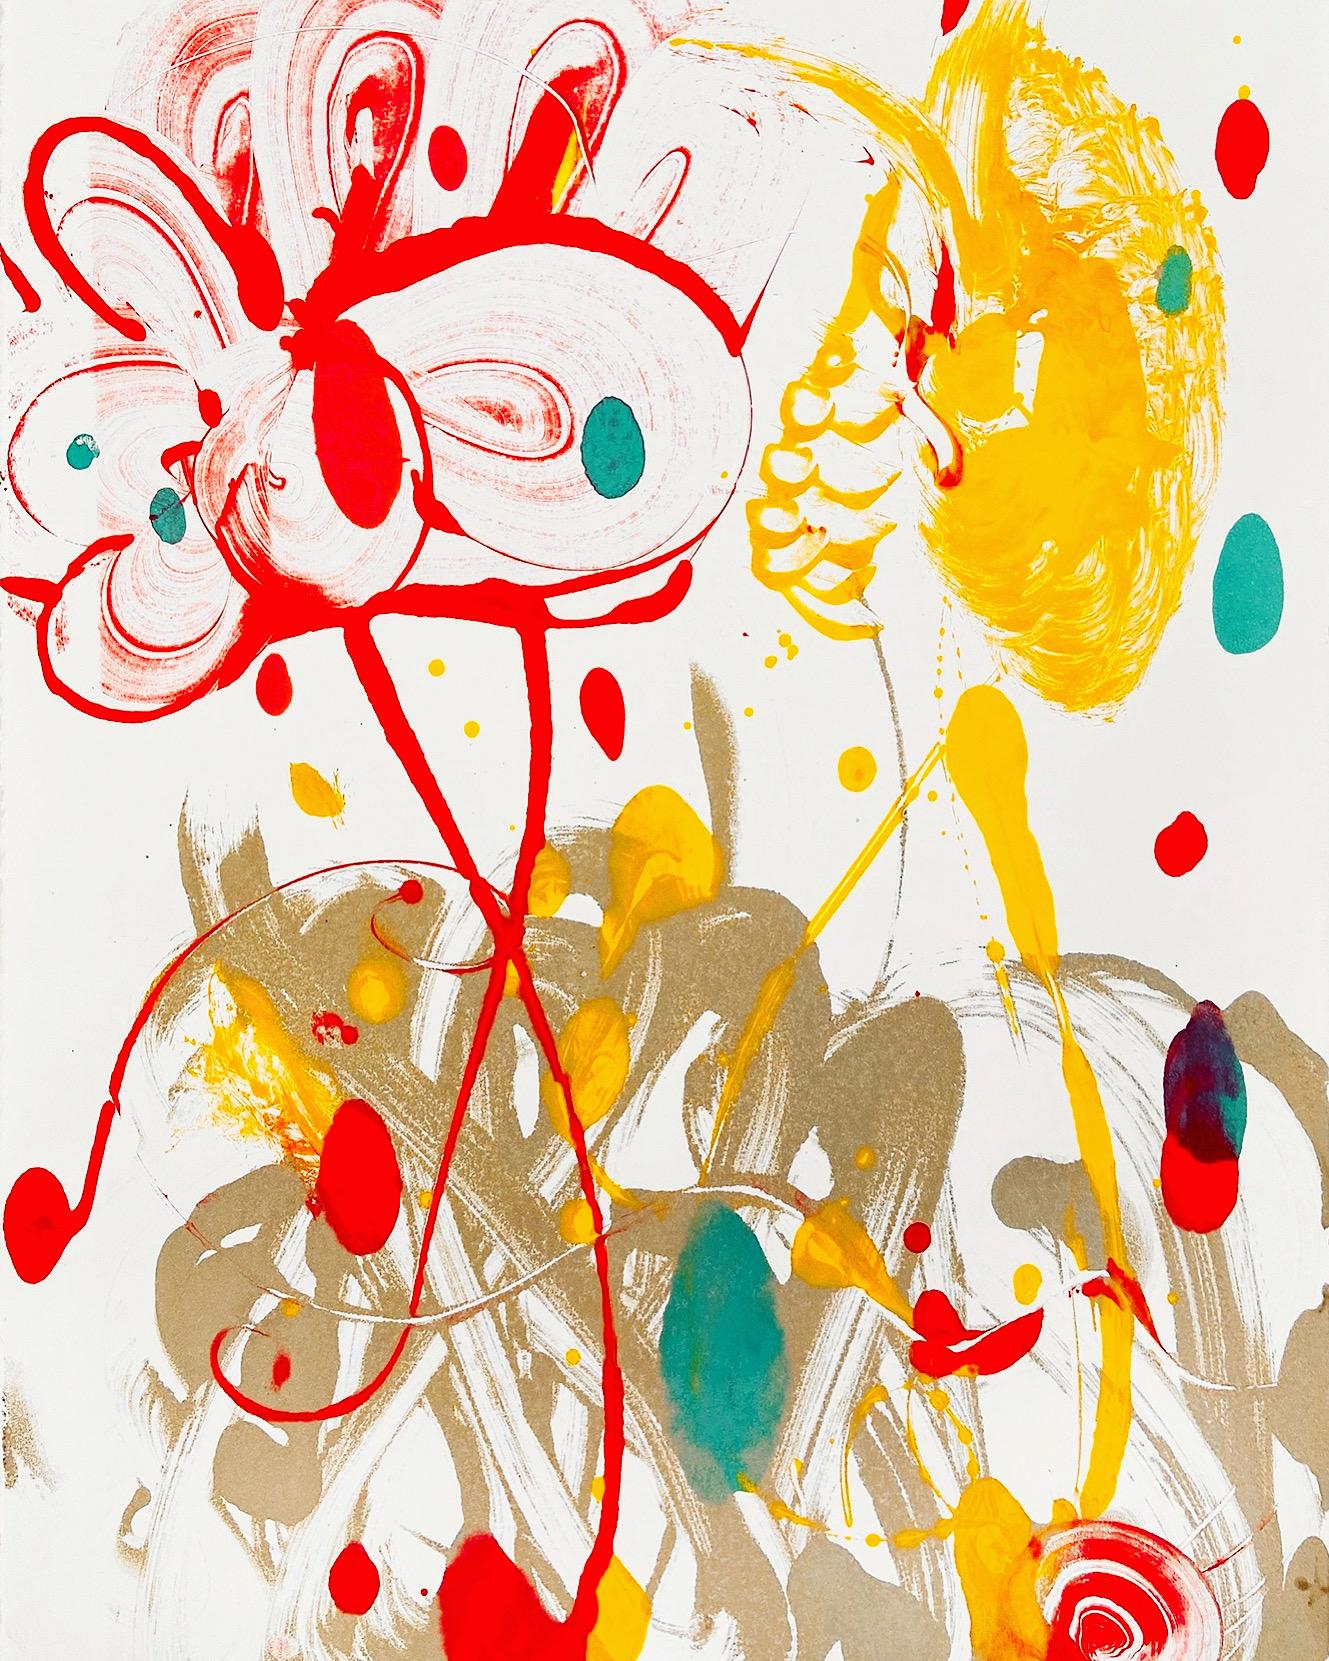 Catherine Howe
Flowerbird
2021
Acrylic and mica pigment on full sheet of Stonehenge paper
Signed
30 x 22 inches

Installation image: The Beekman, New York, Penthouse suite. 


(b. 1961, United States)

Catherine Howe is a New York artist with an